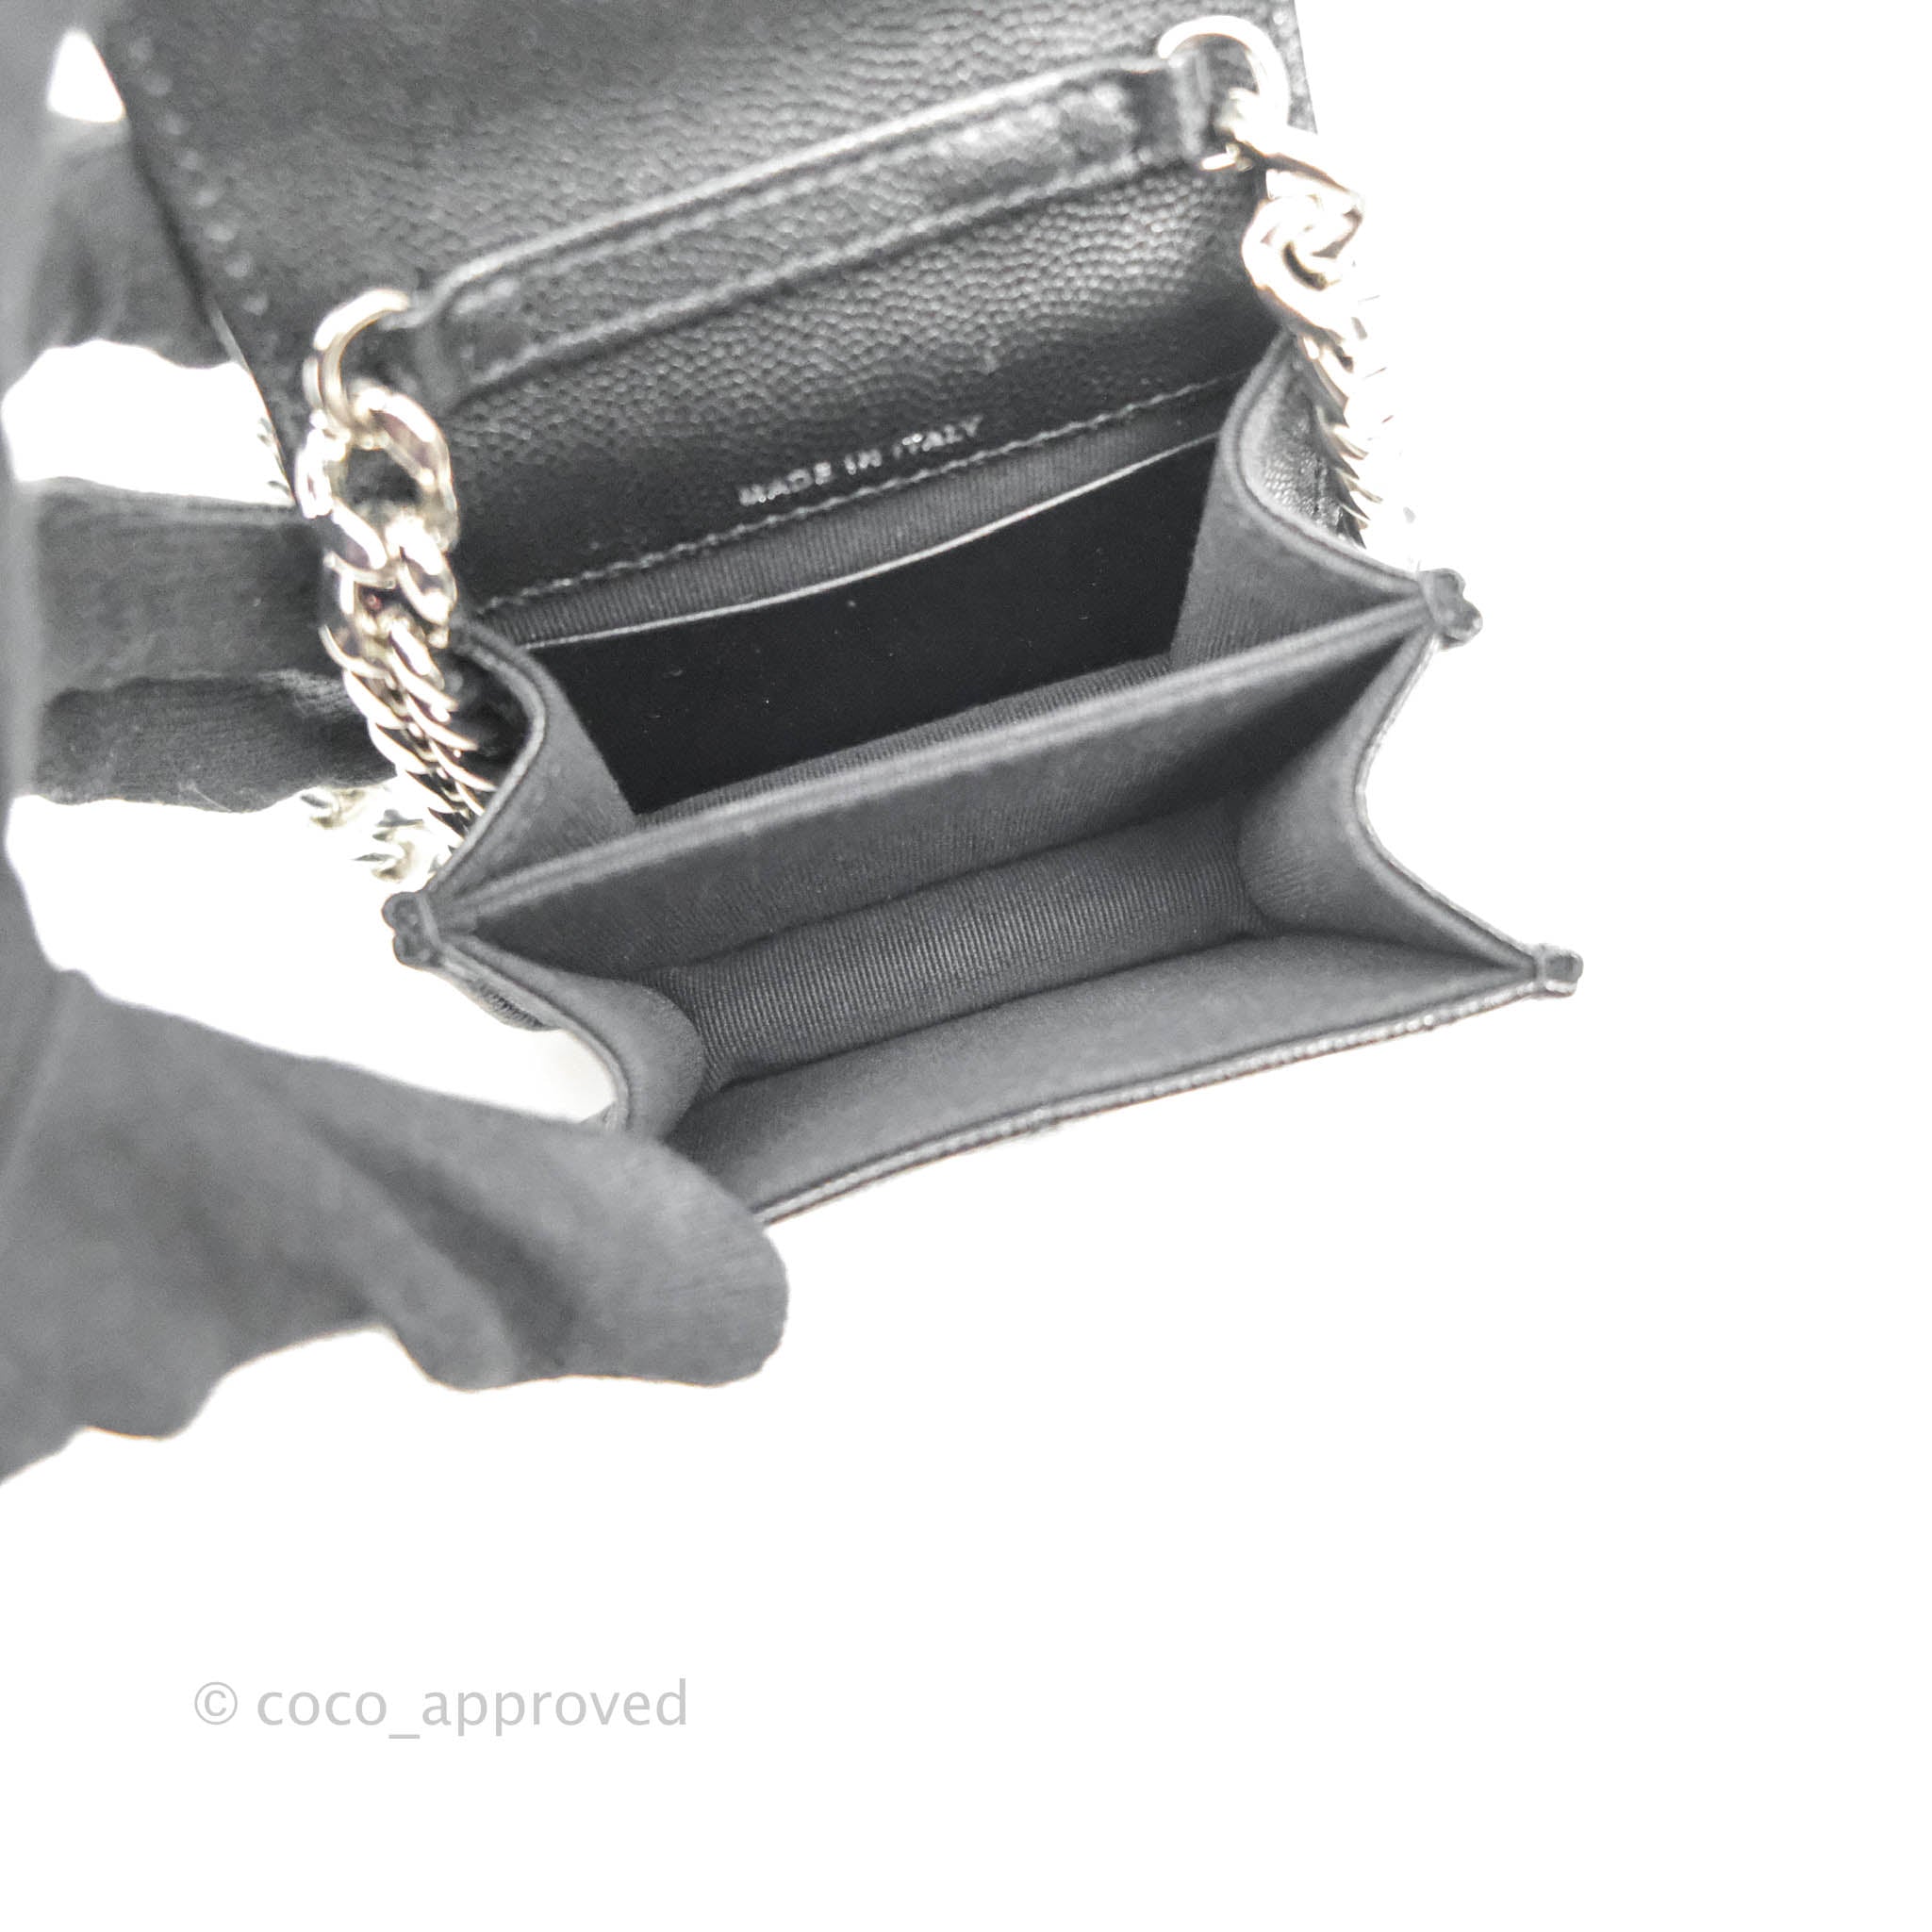 CHANEL 22 MINI CLUTCH WITH CHAIN in NAVY: Modshots & What fits inside?! ❤️  